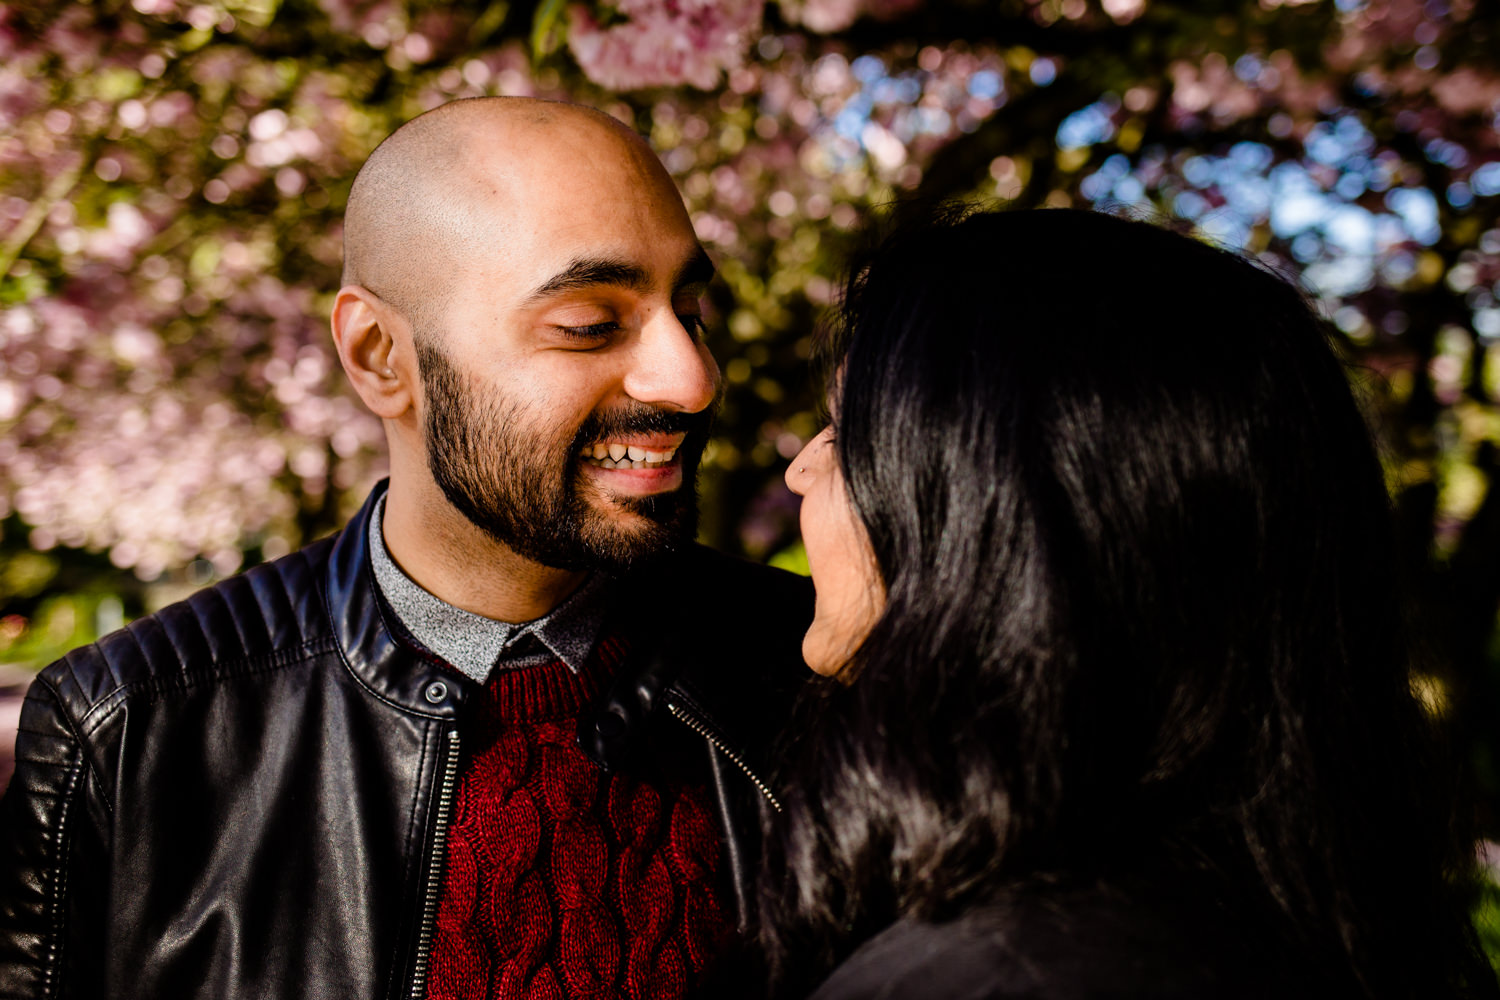 A man and woman looking at each other under a blossom tree in Manchester